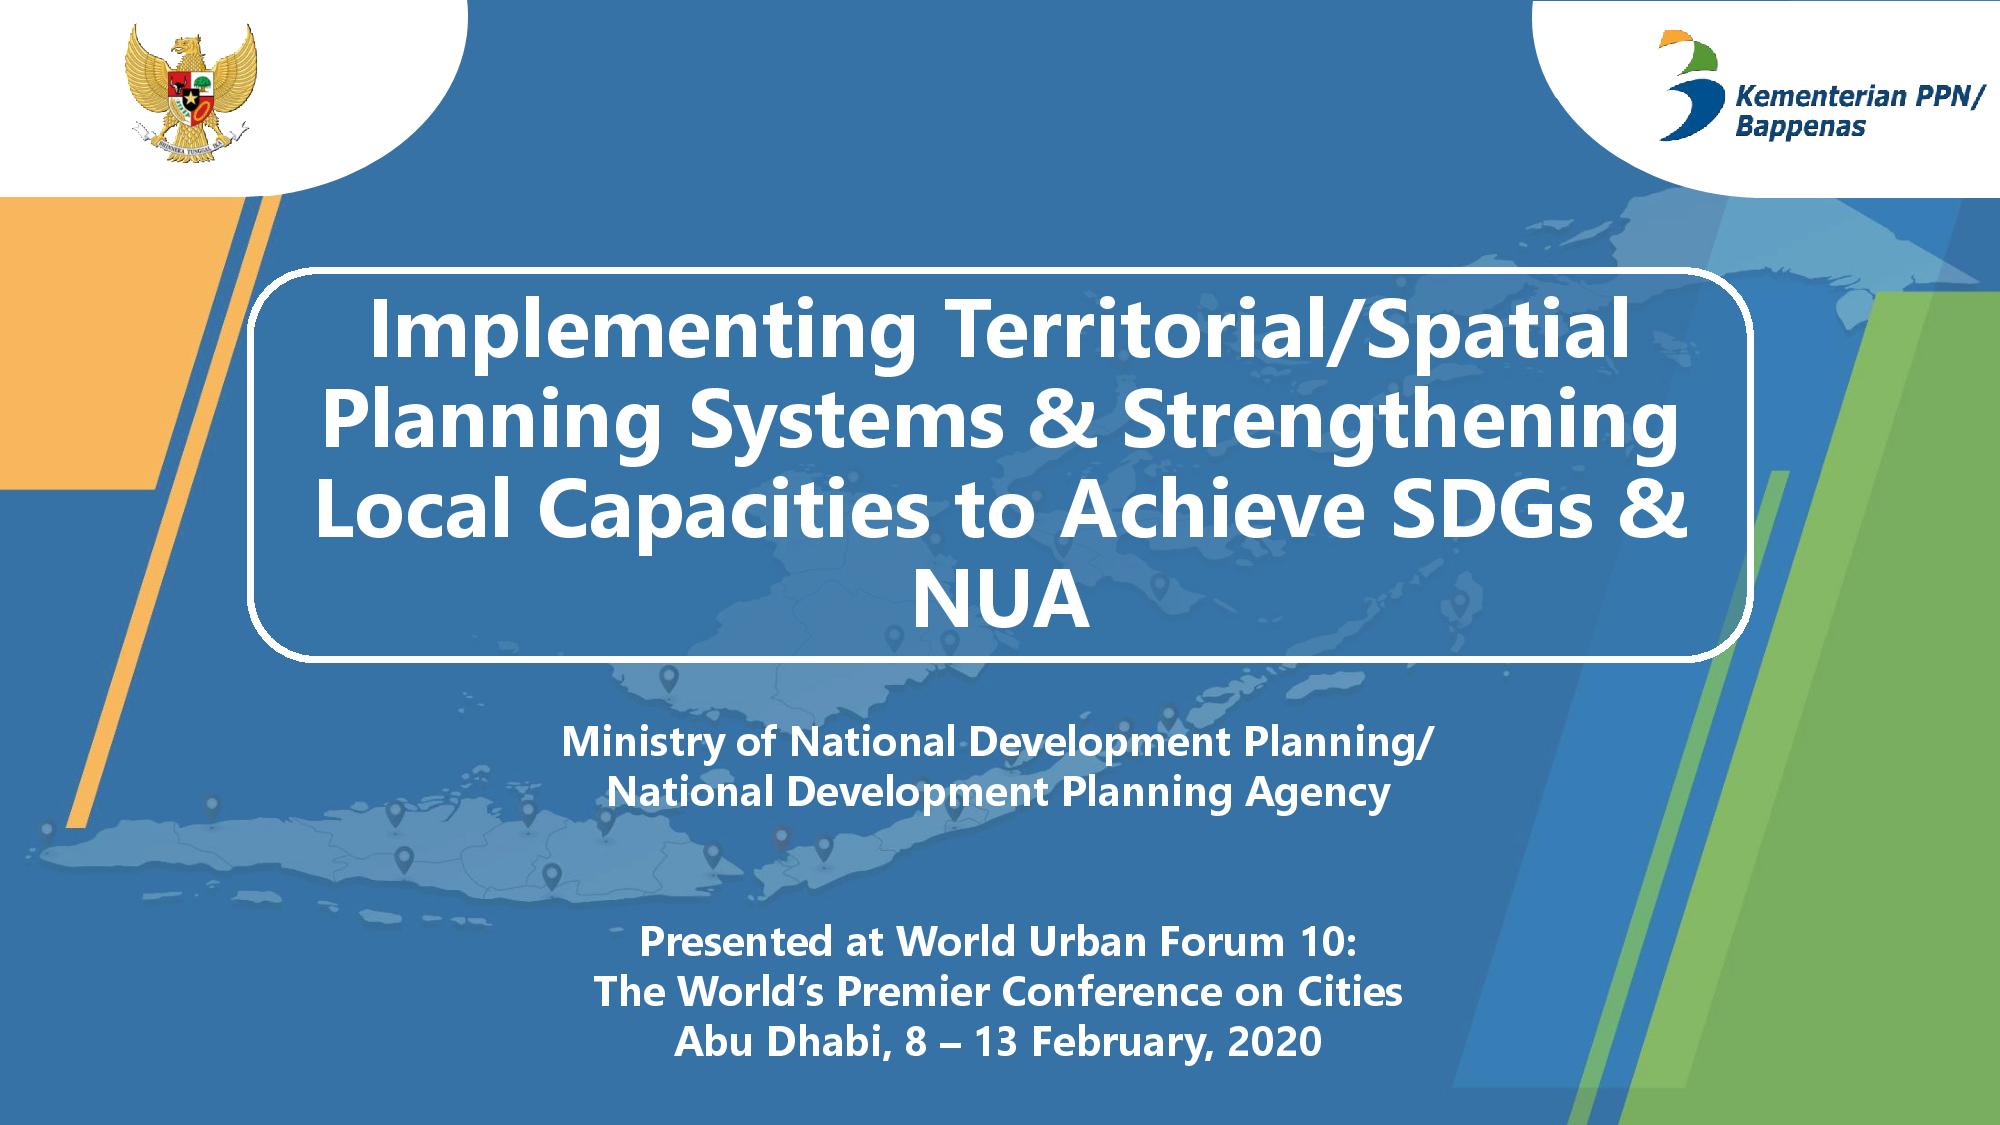 2nd Spatial Planning Platform (SPP) Meeting: Part I – Implementing Territorial/Spatial Planning Systems & Strengthening Local Capacities to Achieve SDGs and NUA (Indonesia)